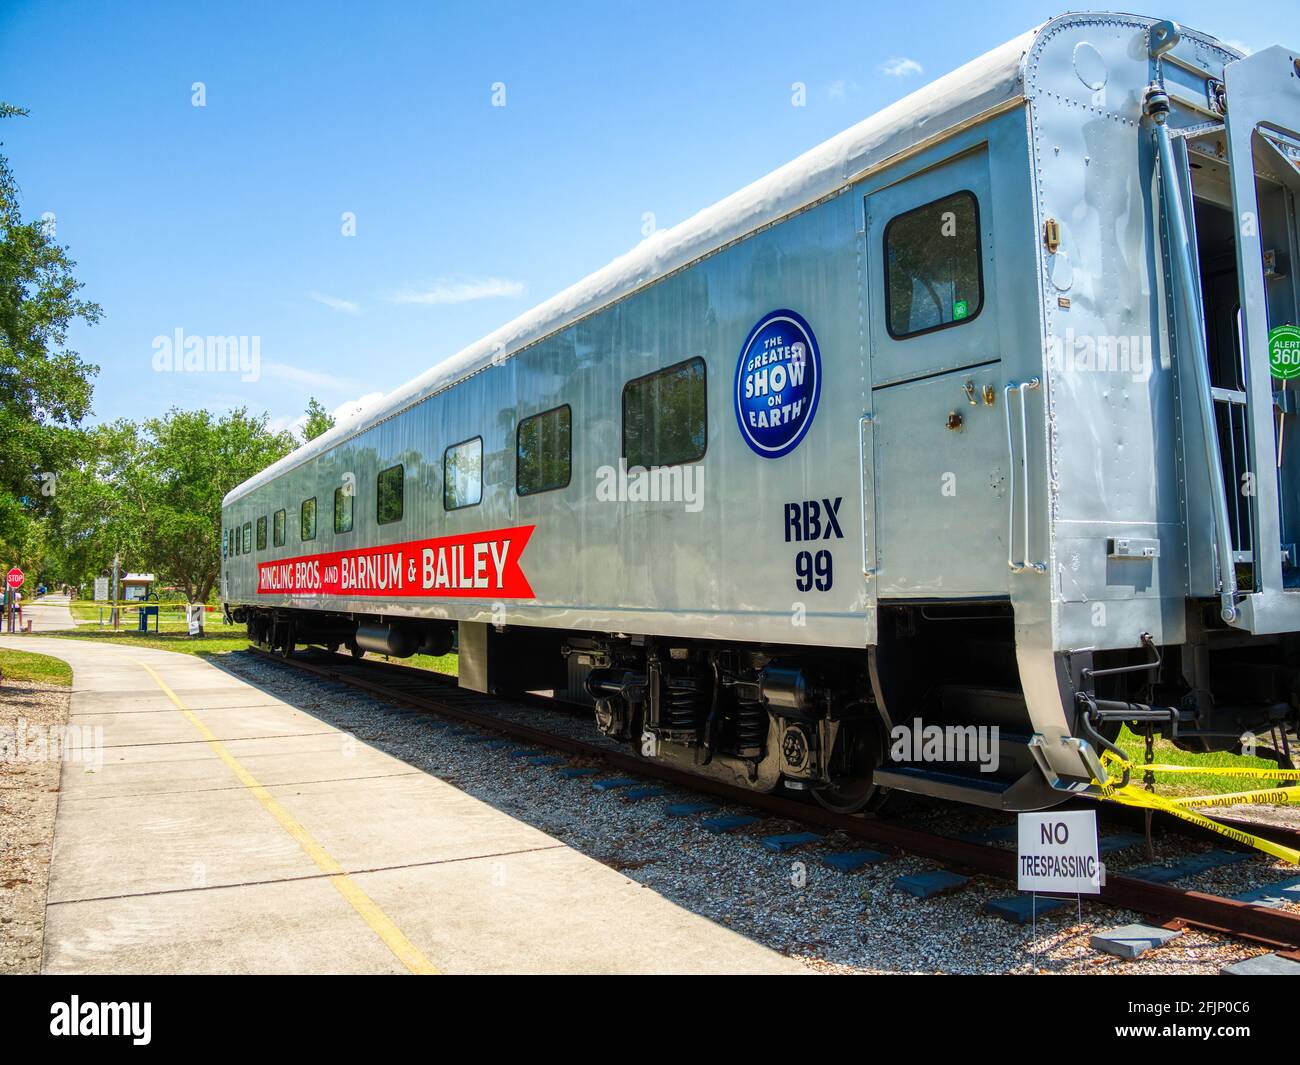 A restored sleeping car that once belonged to Ringling Bros. and Barnum & Bailey Circus at the 1927 Historic Venice Train Depot in Venice Florida USA Stock Photo